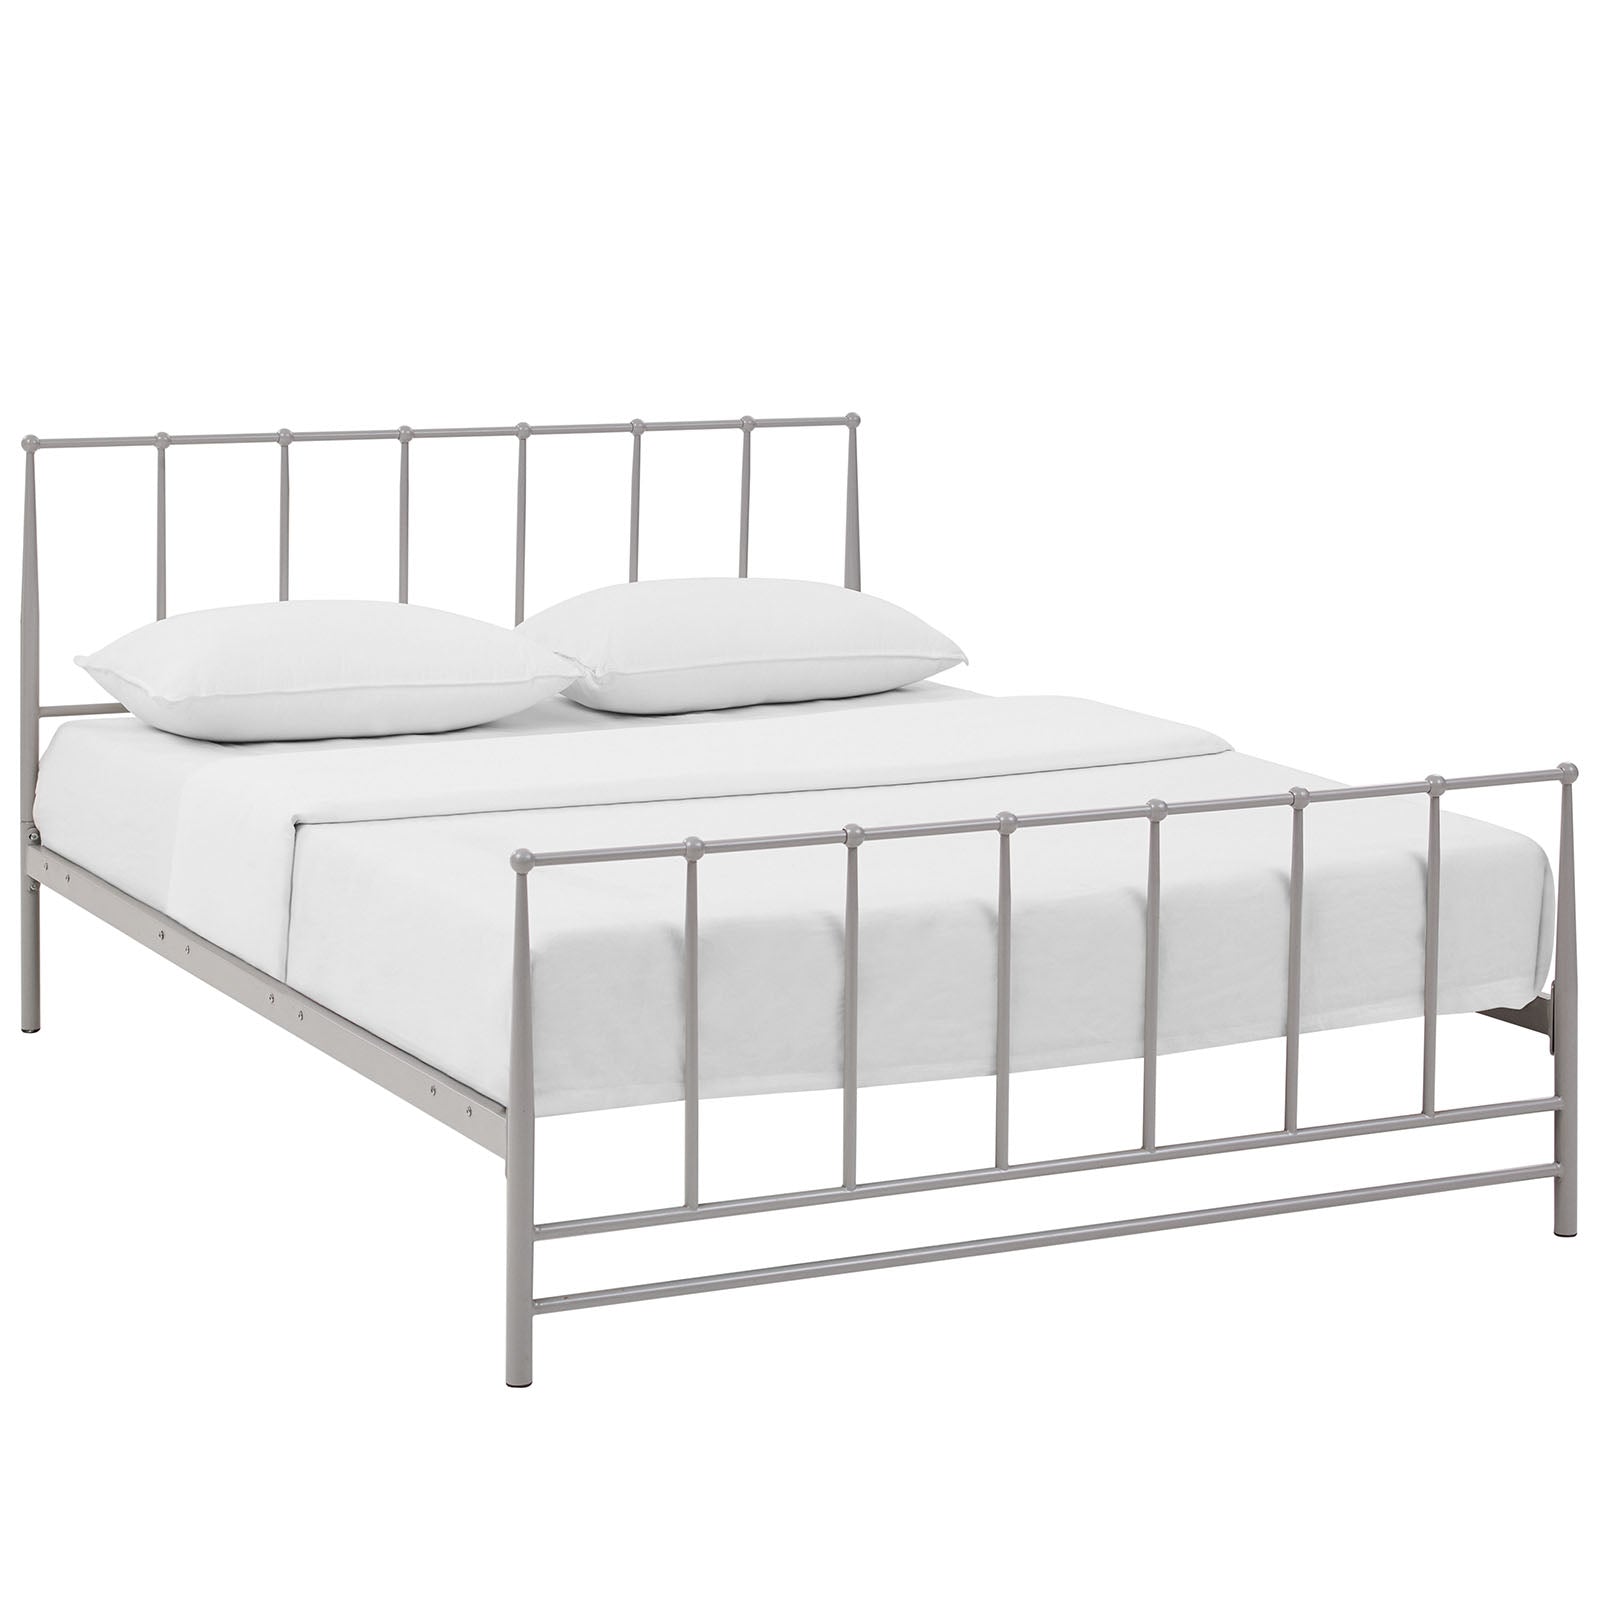 Modway Beds - Estate King Bed Gray